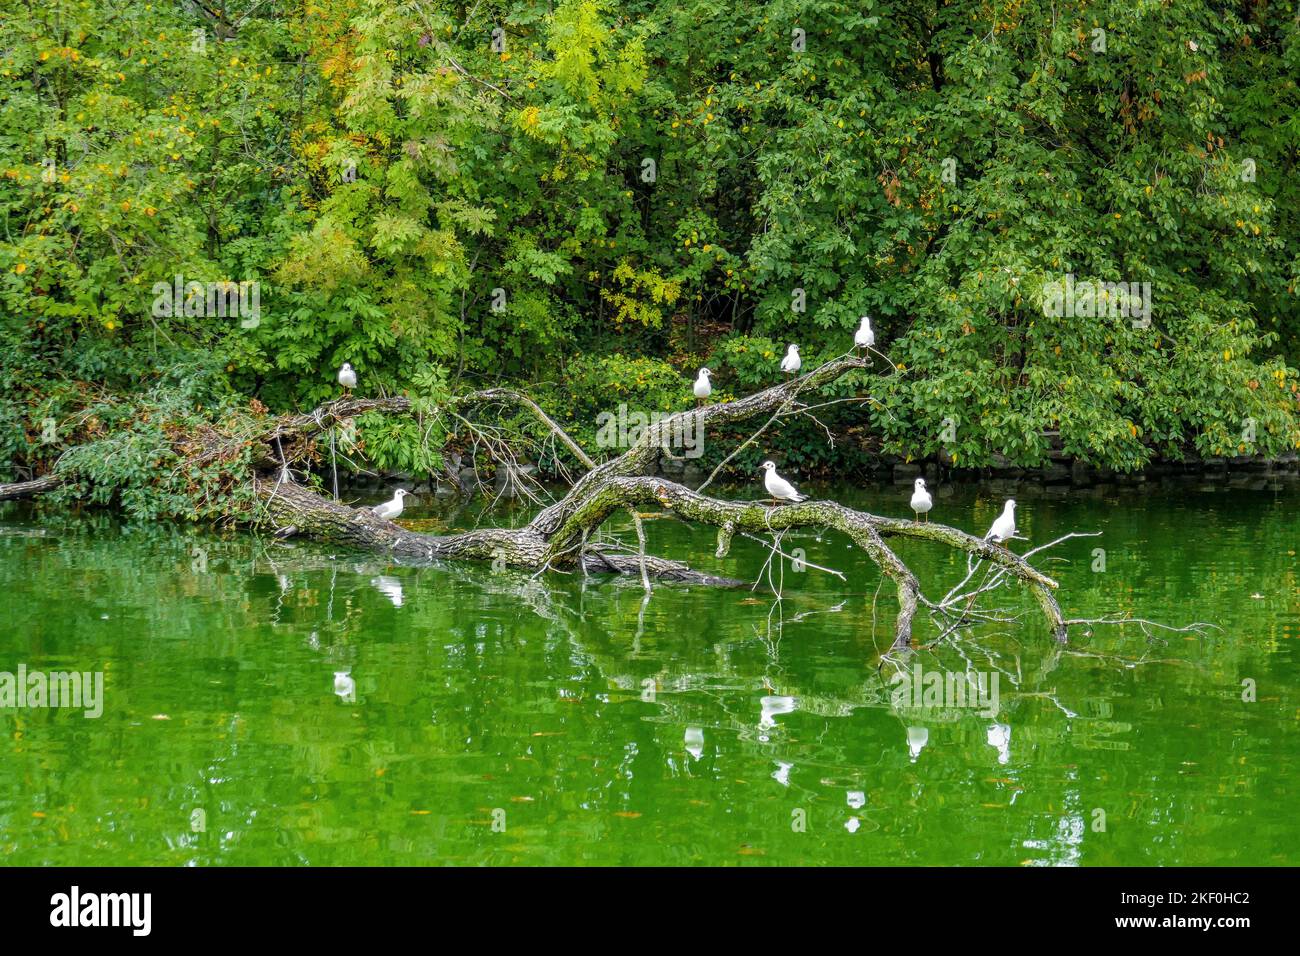 Seagulls sitting on a branch in a green lake in the city of Parma, Italy Stock Photo